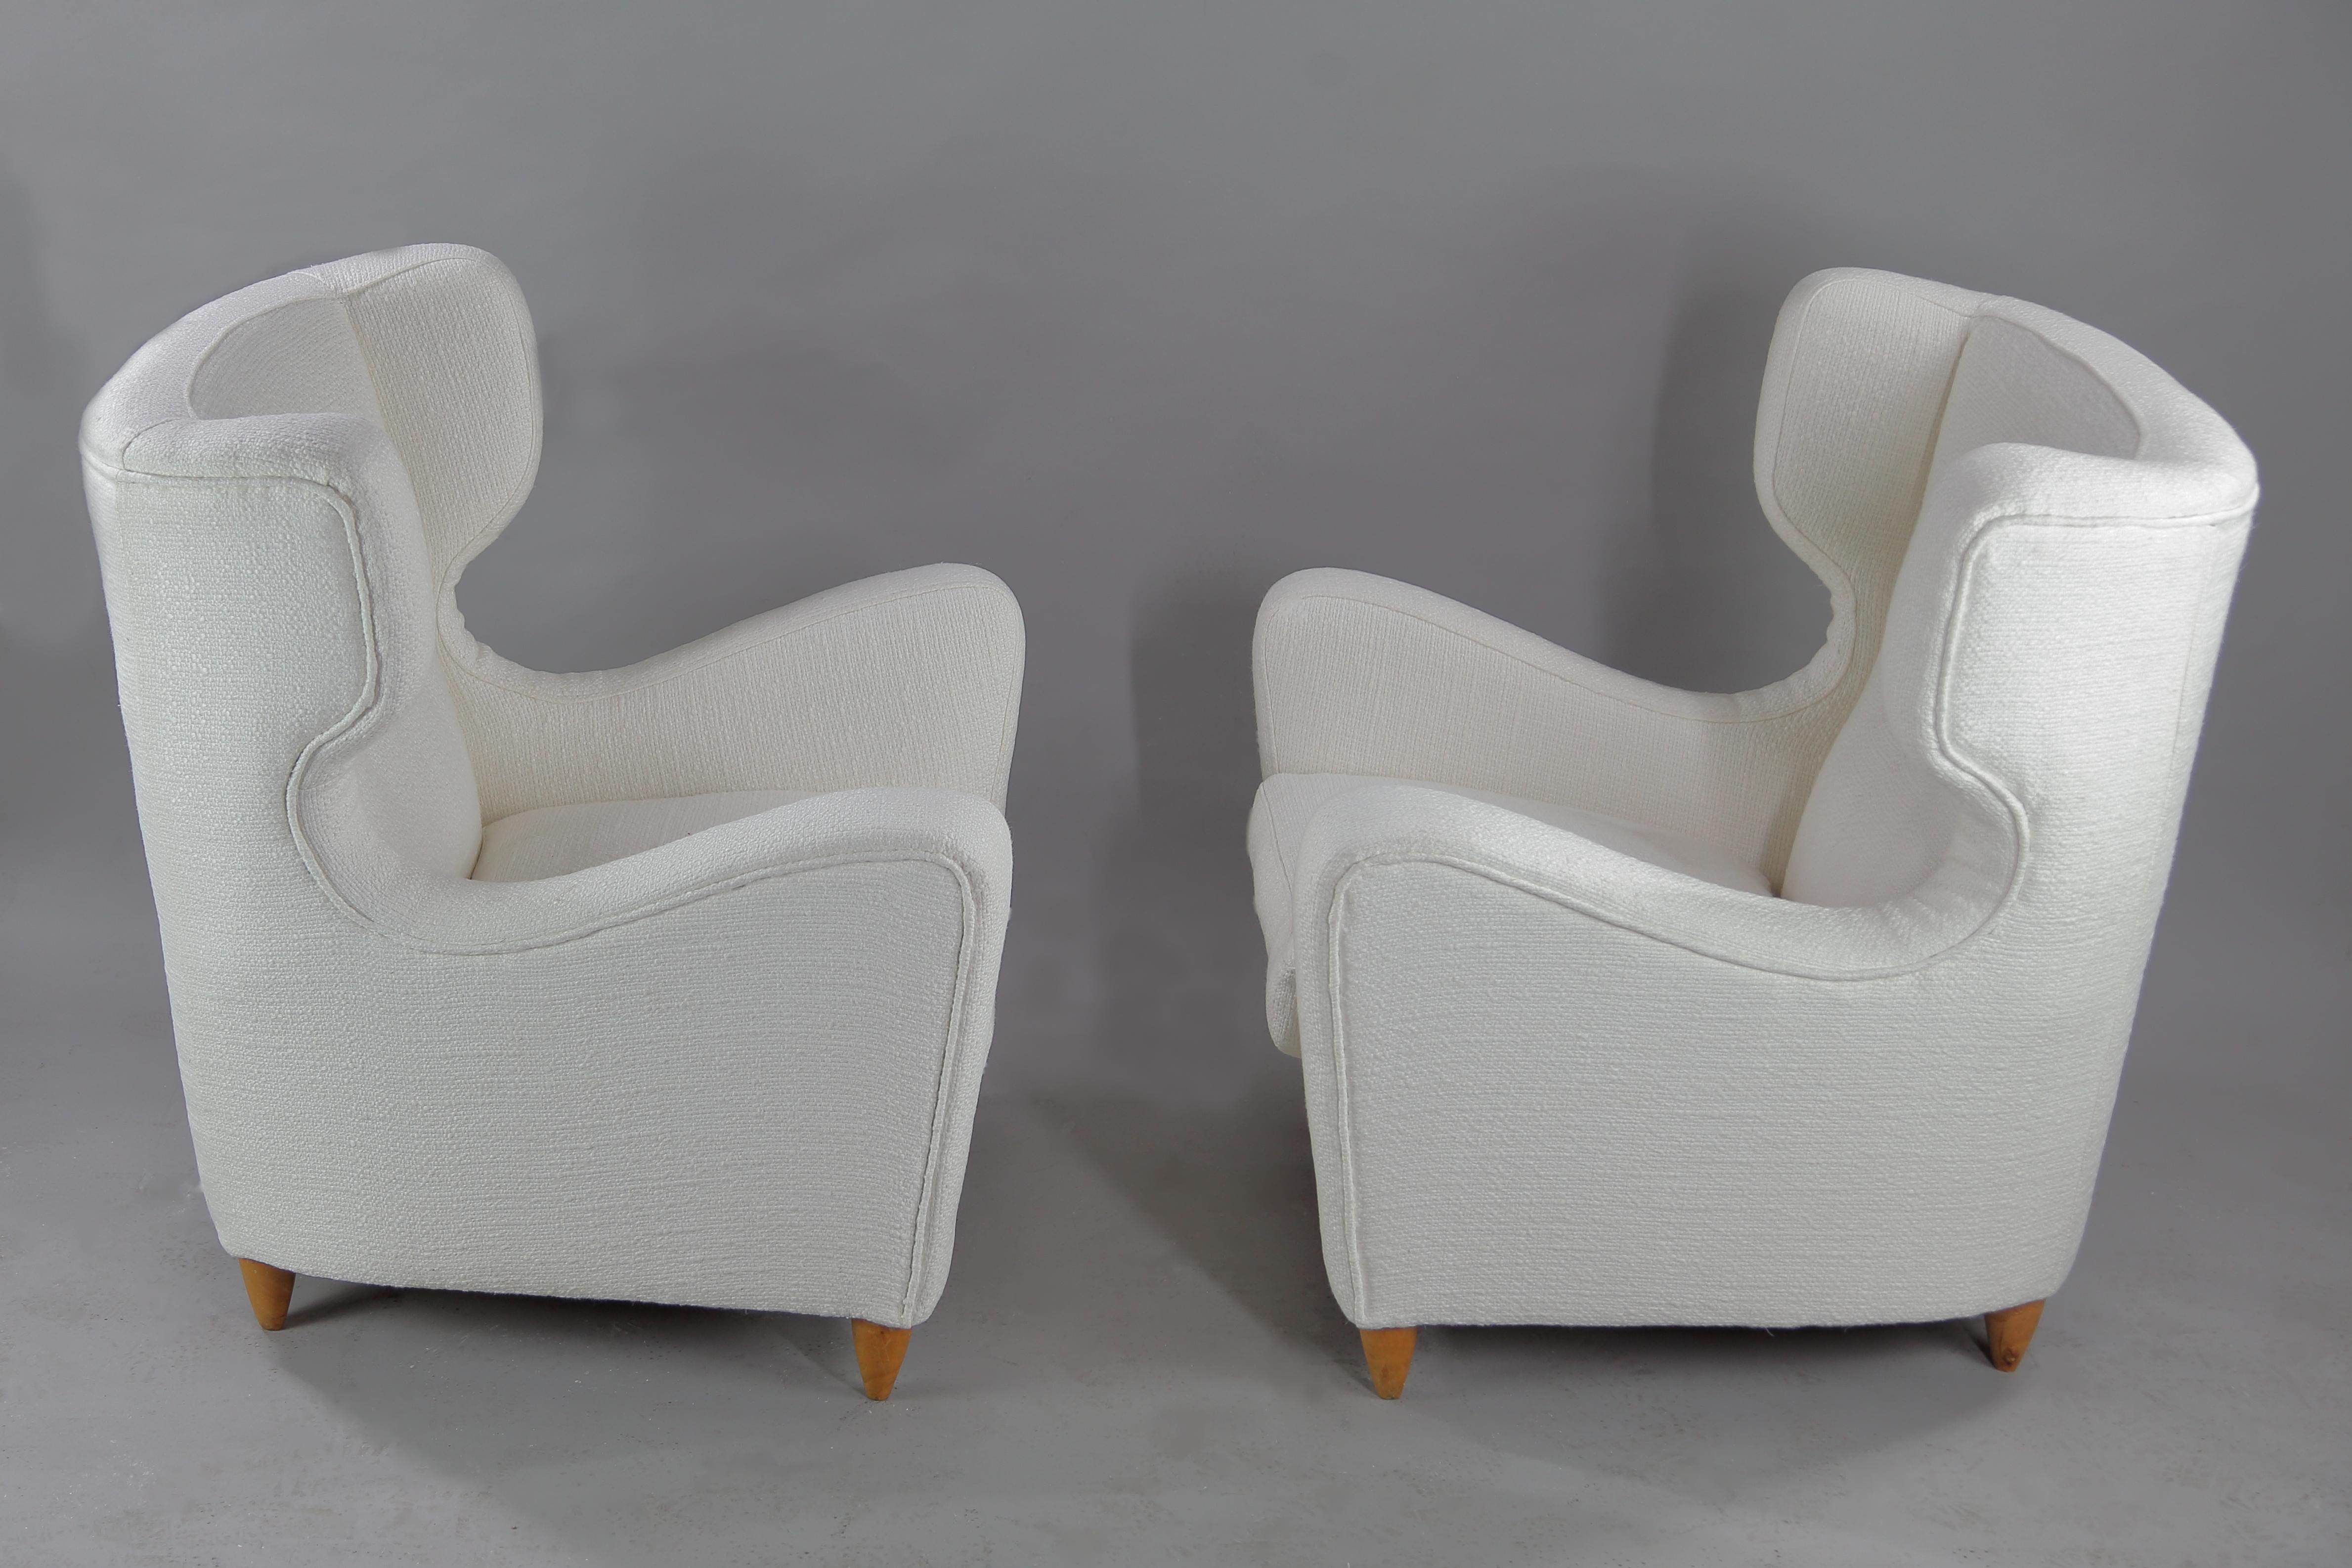 Italian Wingback Chairs by Melchiorre Bega 1940s, Reupholstered in Metaphore Fabric For Sale